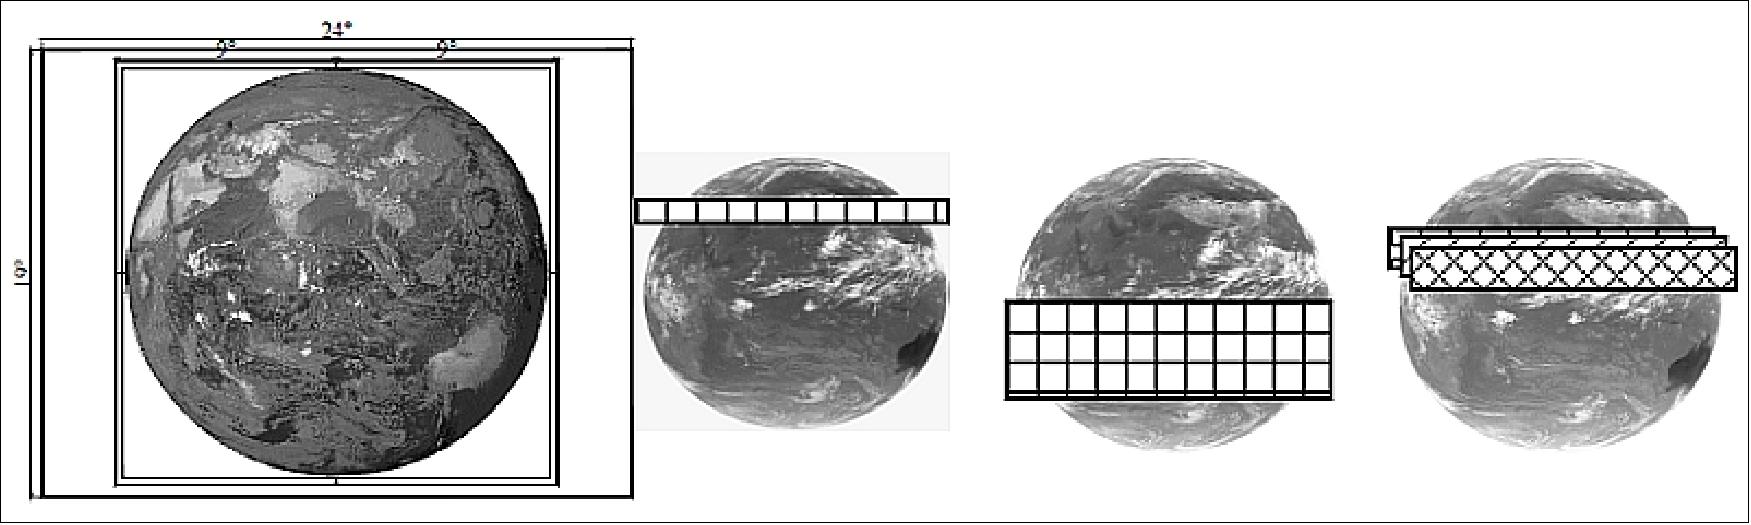 Figure 8: Left: FOR (Field of Regard) and placement of full disk mode; Right: programmable sector mode (image credit: ISRO)